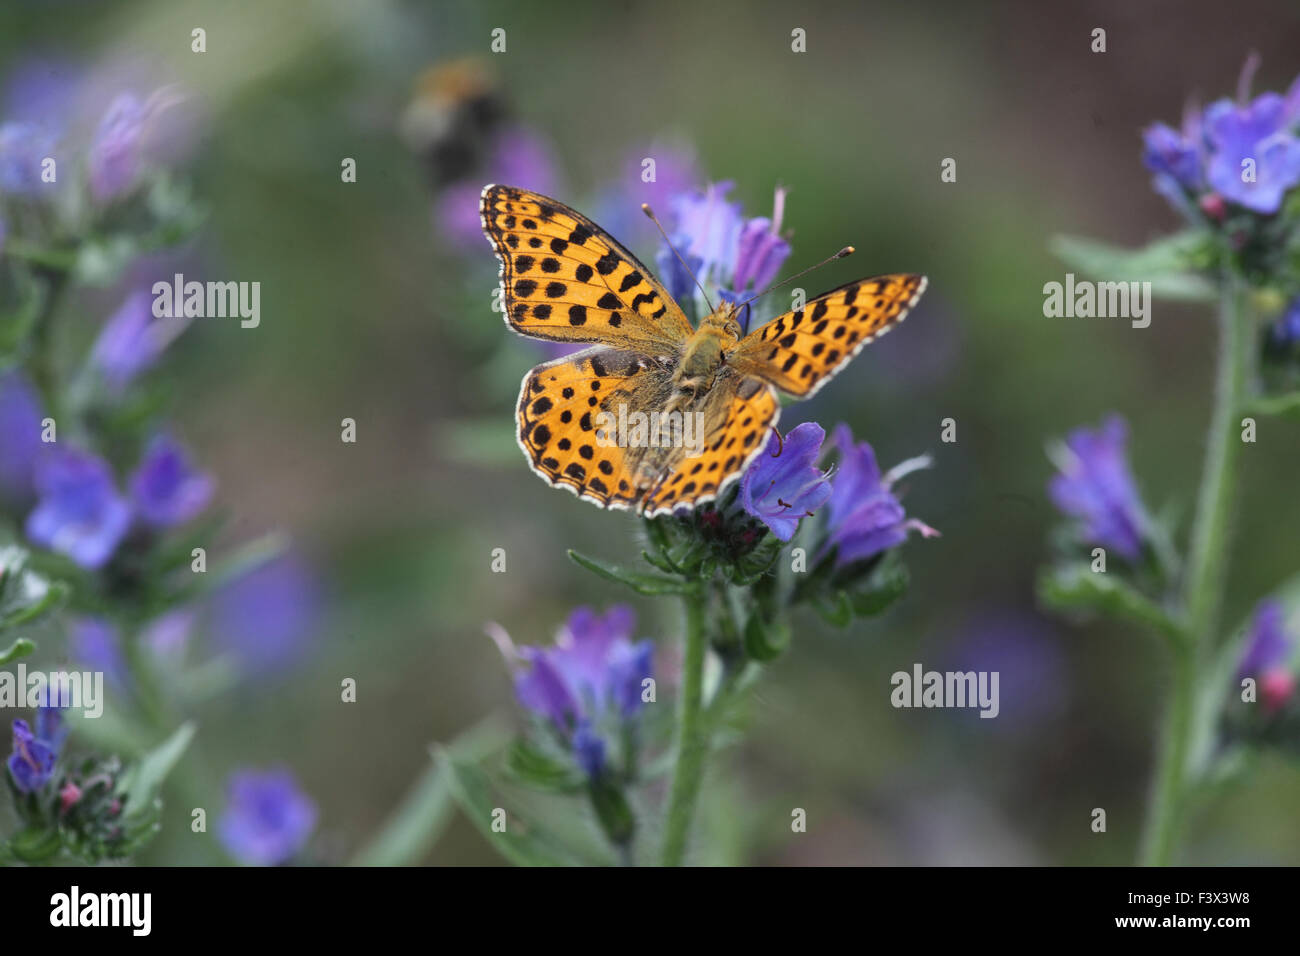 Queen of spain fritillary Feeding on vipers bugloss Hungary June 2015 Stock Photo